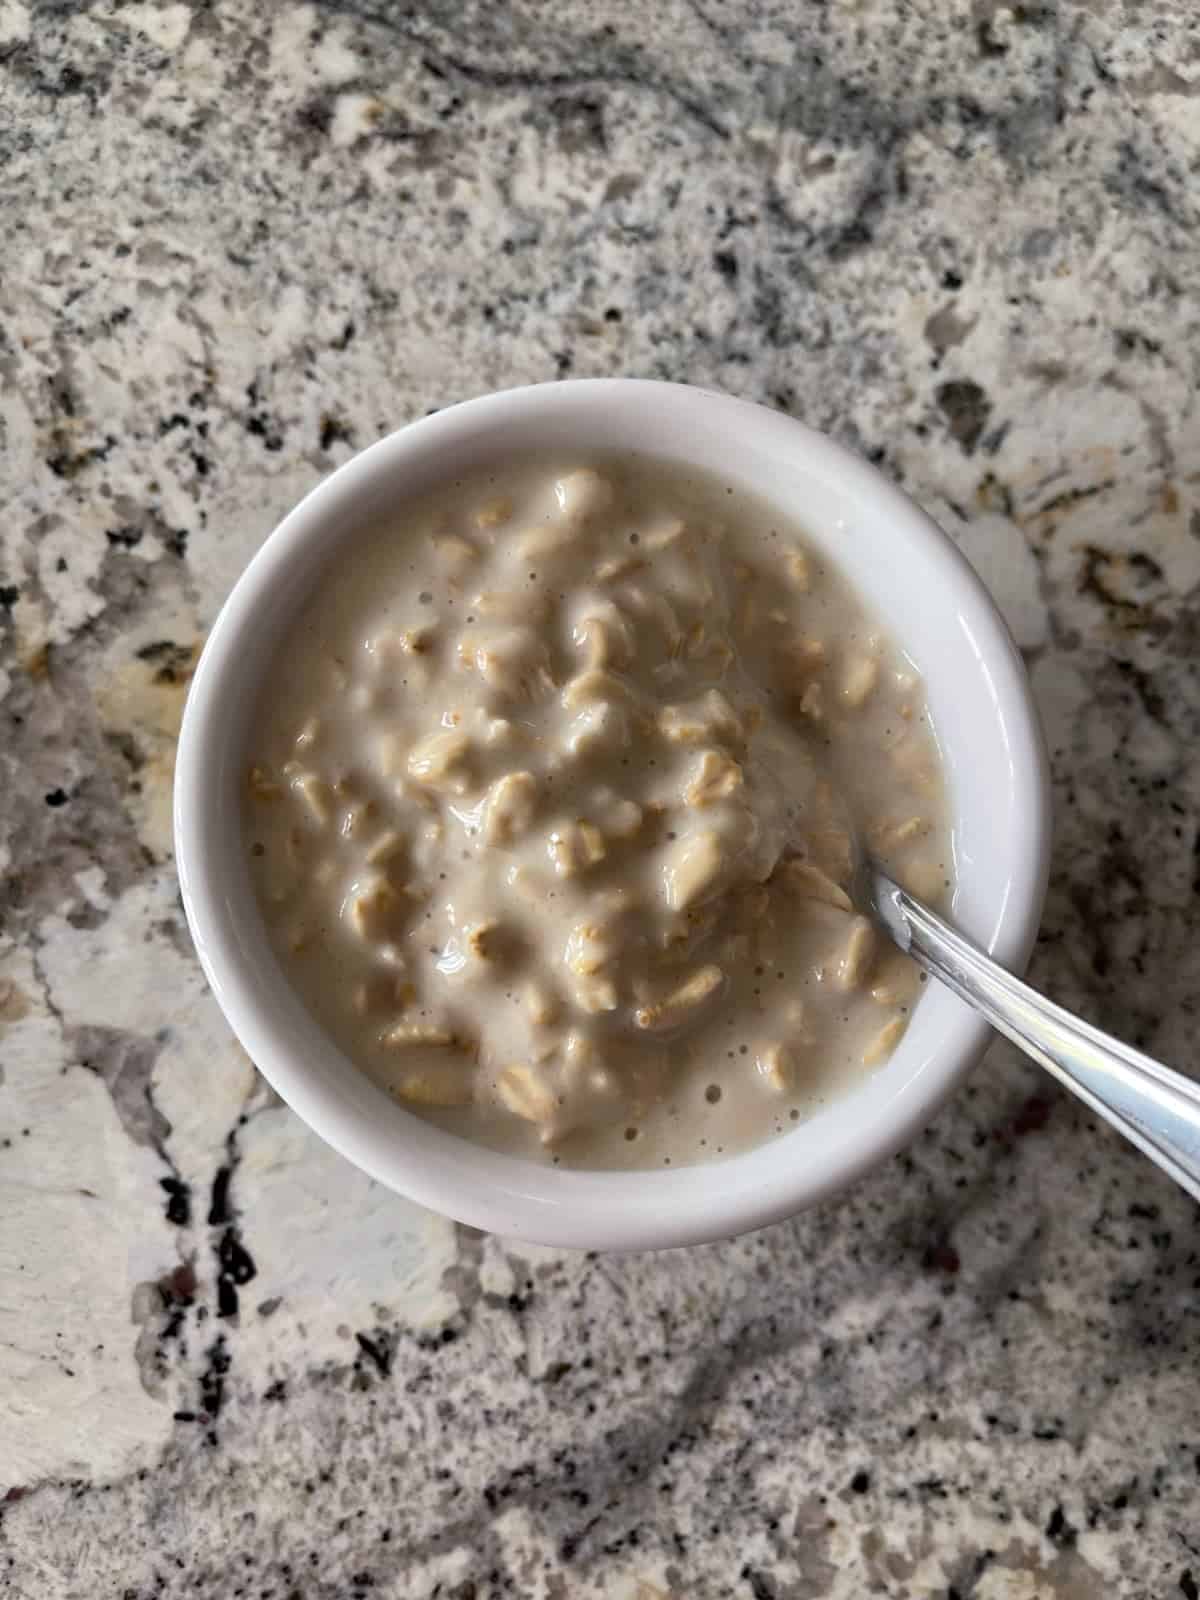 Cheesecake overnight oats without berries in small white bowl with spoon.